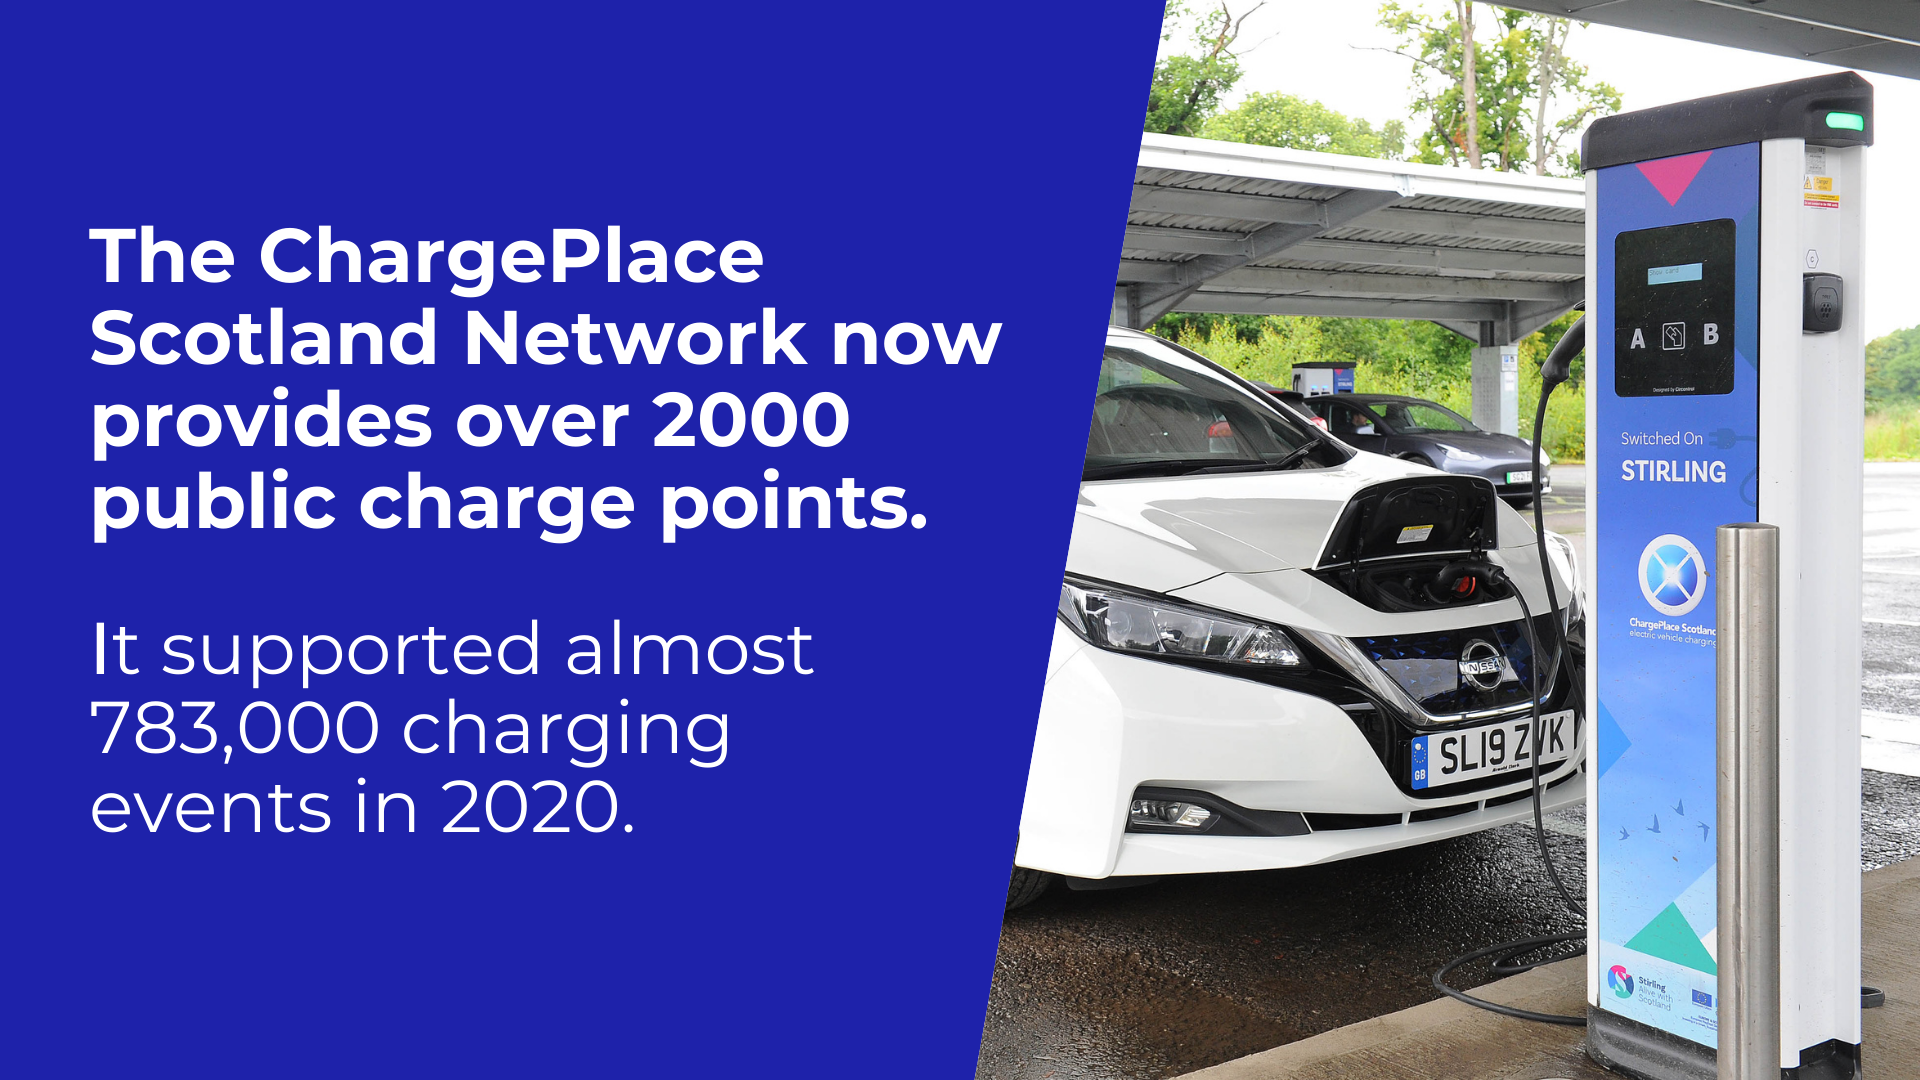 Picture of an electric car charging up at a ChargePlace Scotland charge point. Caption: 'The ChargePlace Scotland Network now provides over 2000 public charge points. It supported almost 783,000 charging events in 2020.'